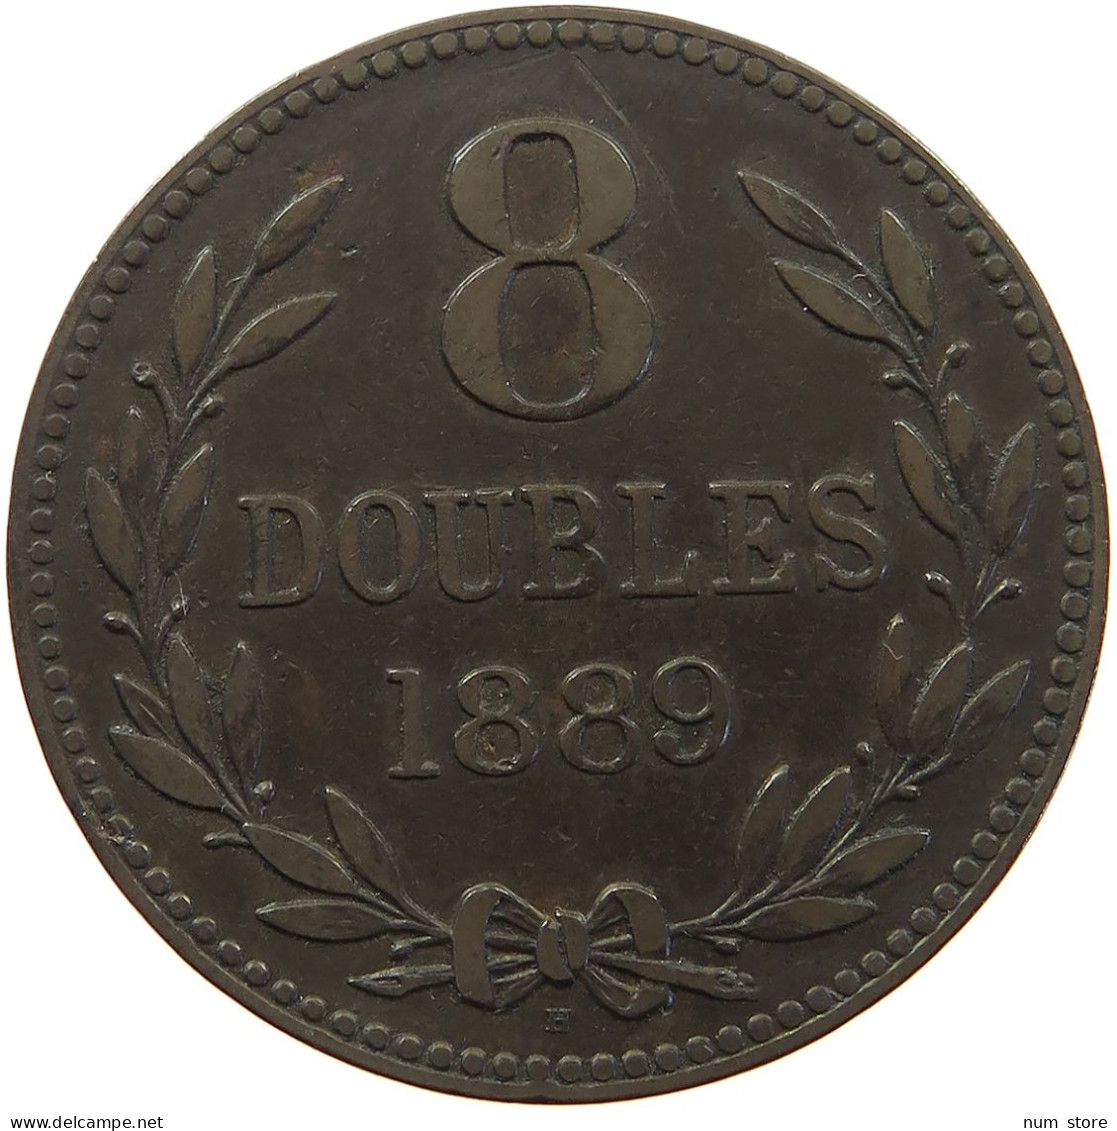 GUERNSEY 8 DOUBLES 1889 Victoria 1837-1901 #s029 0313 - Guernesey